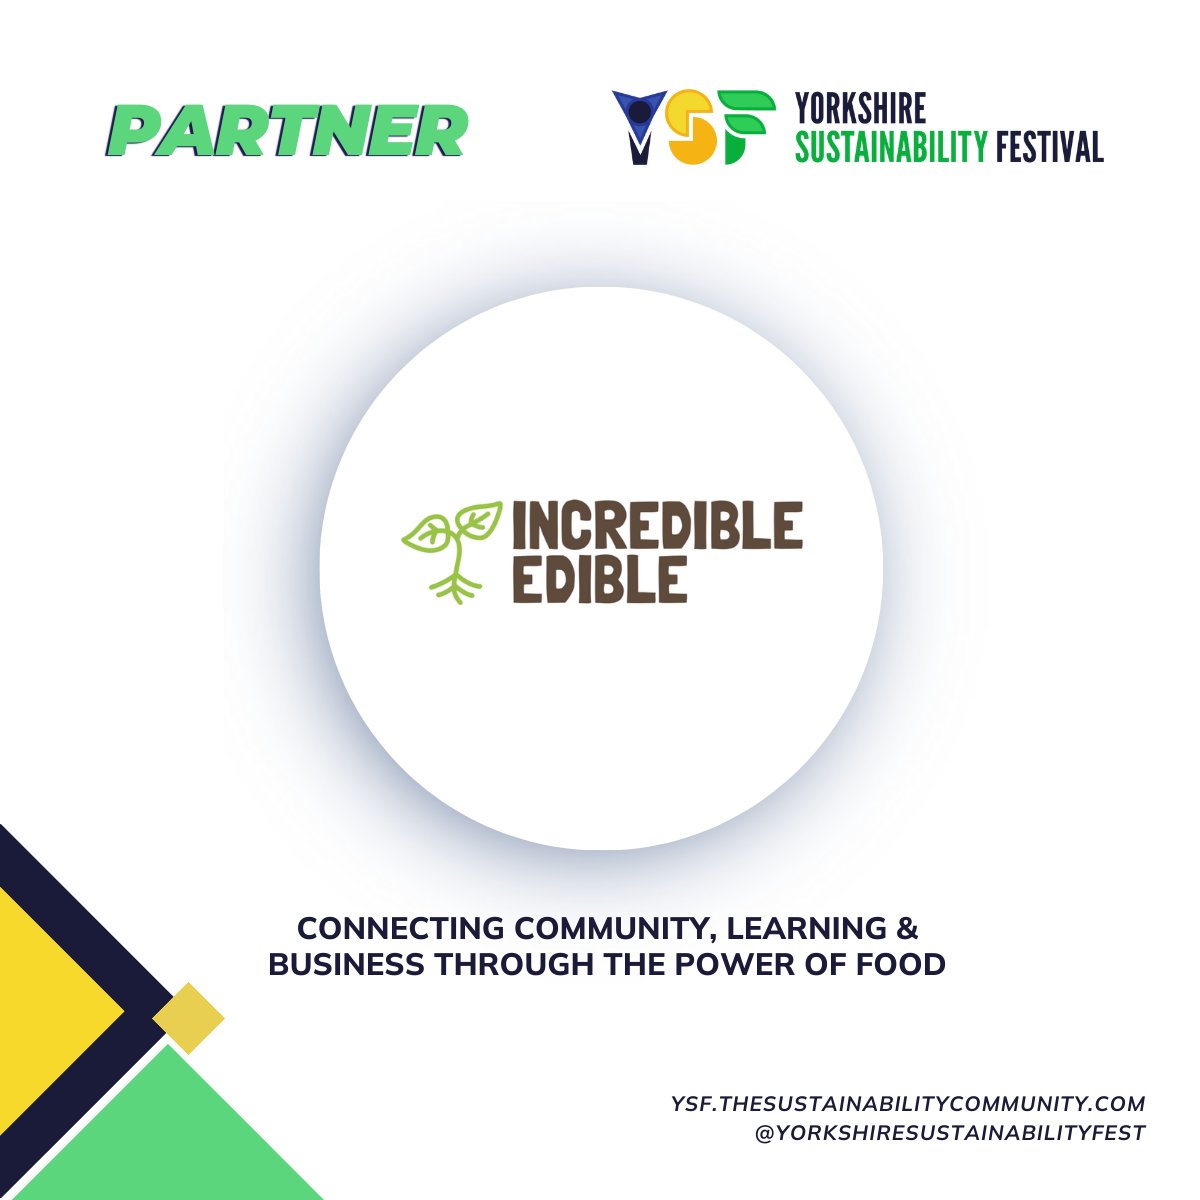 Start to see things differently with Incredible Edible, proud partners of #YSF24. Small actions really do make a big difference and you can see this for yourself at our festival. Grab your tickets now: bit.ly/3uglmRS #communityfood #yorkshirebusiness